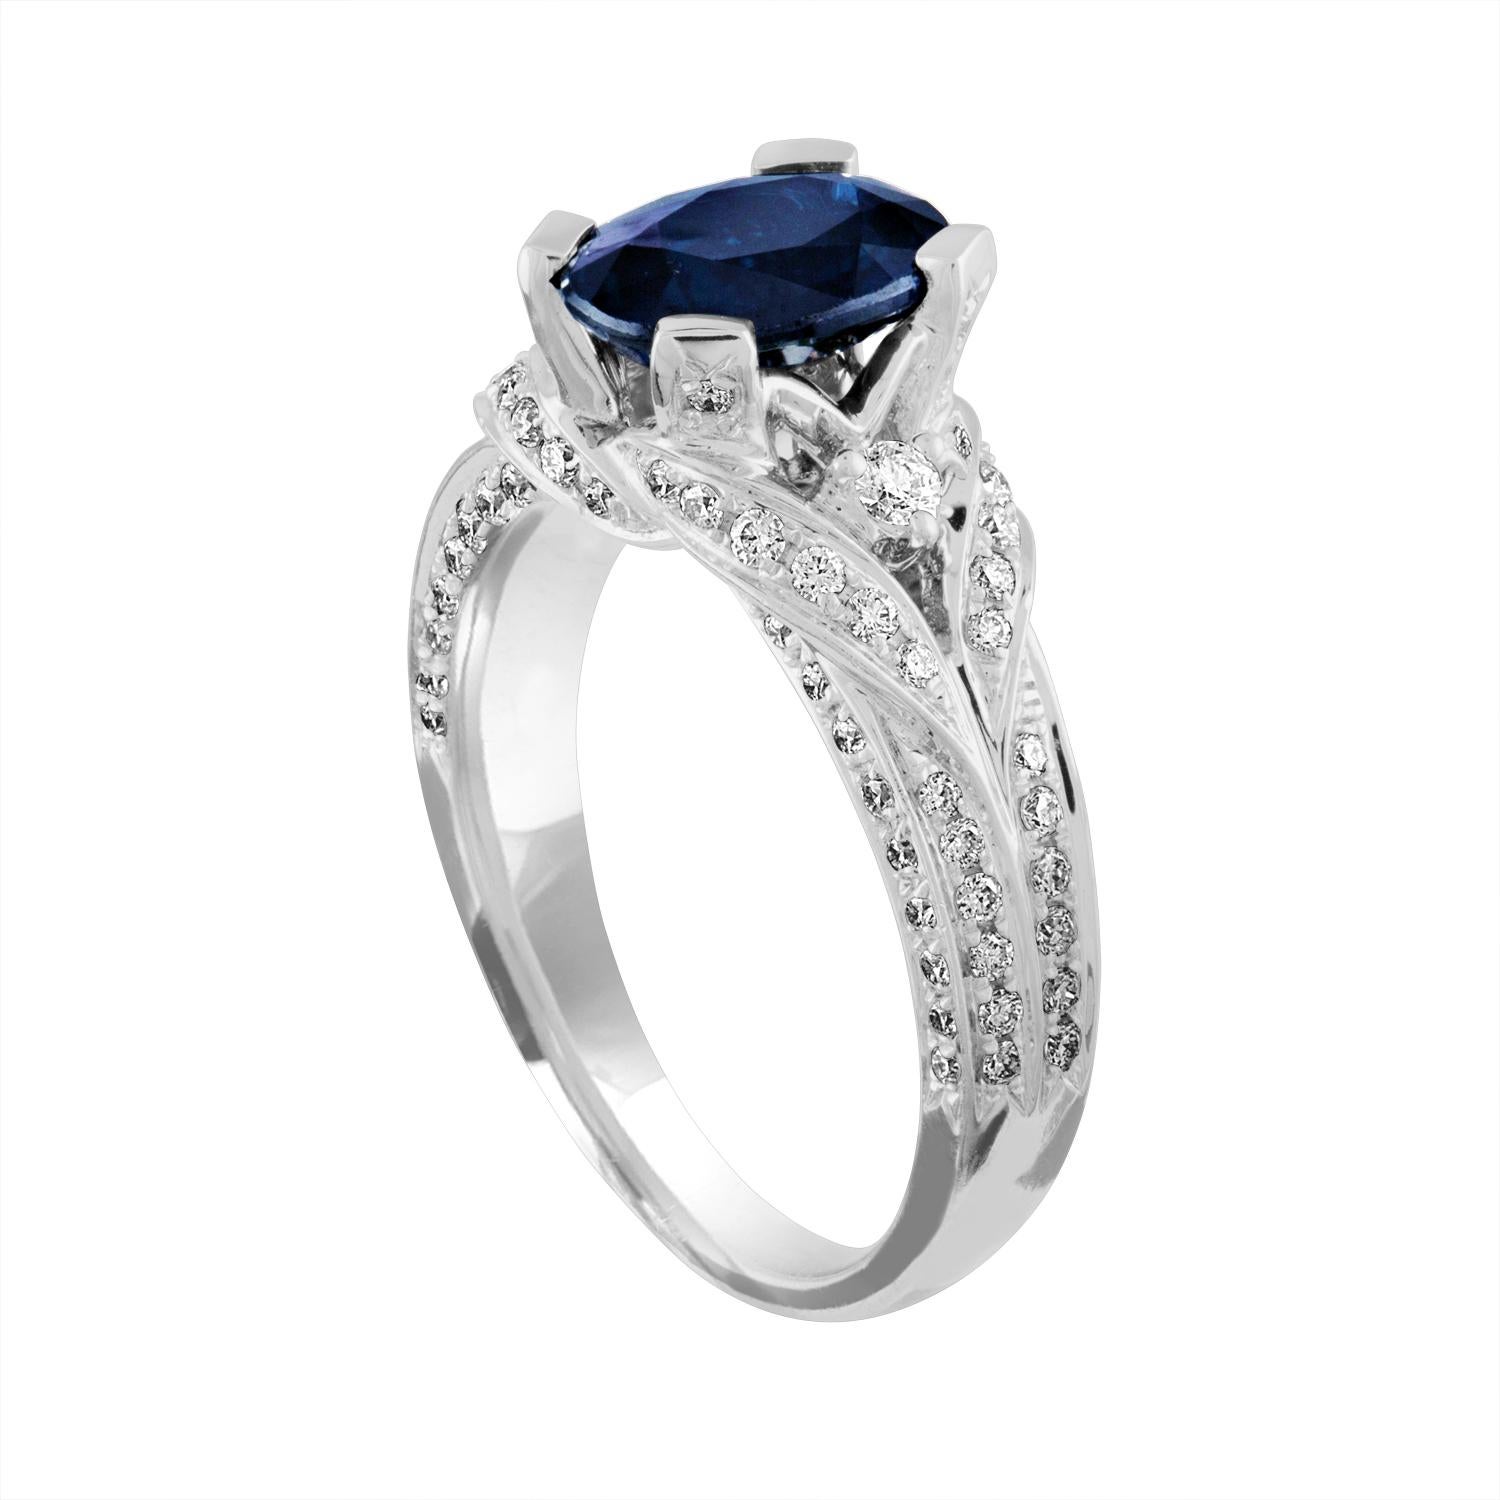 Beautiful Blue Sapphire Ring.
The ring is 18K White Gold.
The Blue Sapphire is Oval 2.16 Carat.
The stone is Heated.
There are 0.75 Carat Diamonds F/G VS/SI.
The ring is a size 6.75, sizable.
The ring weighs 6.3 grams